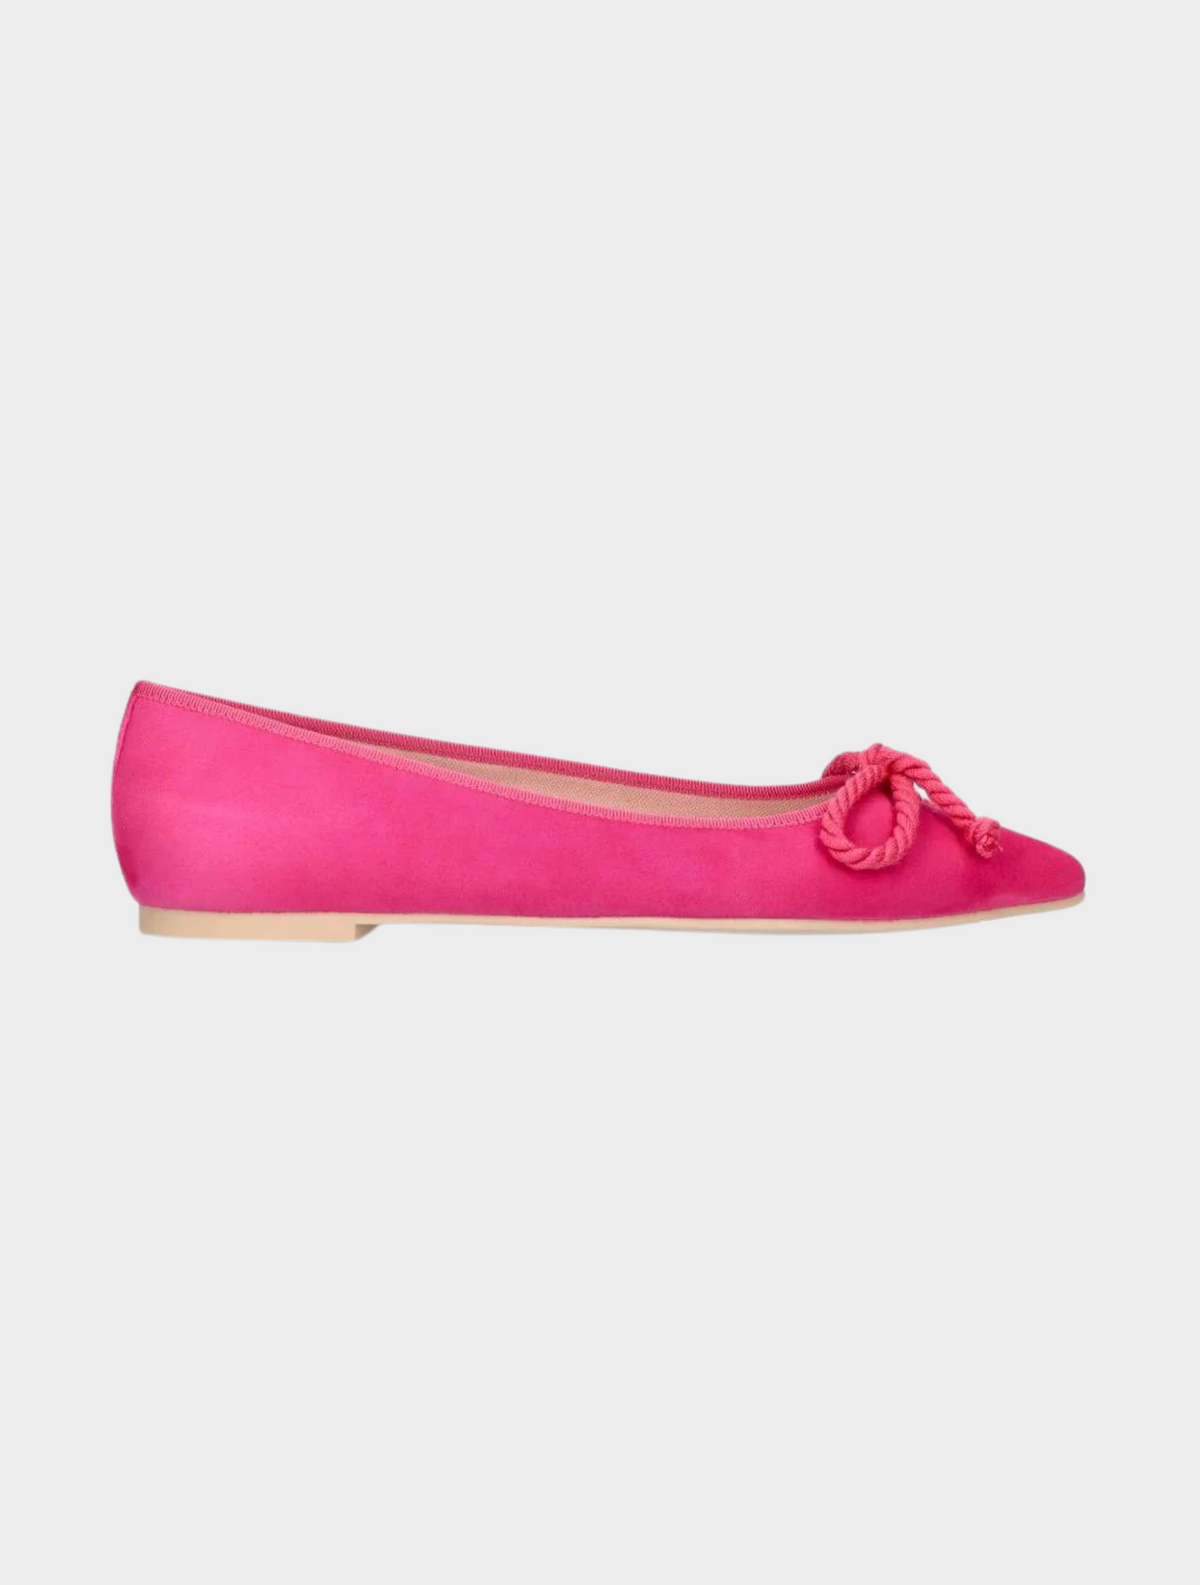 Pink pointed toe ballet pump with rope bow